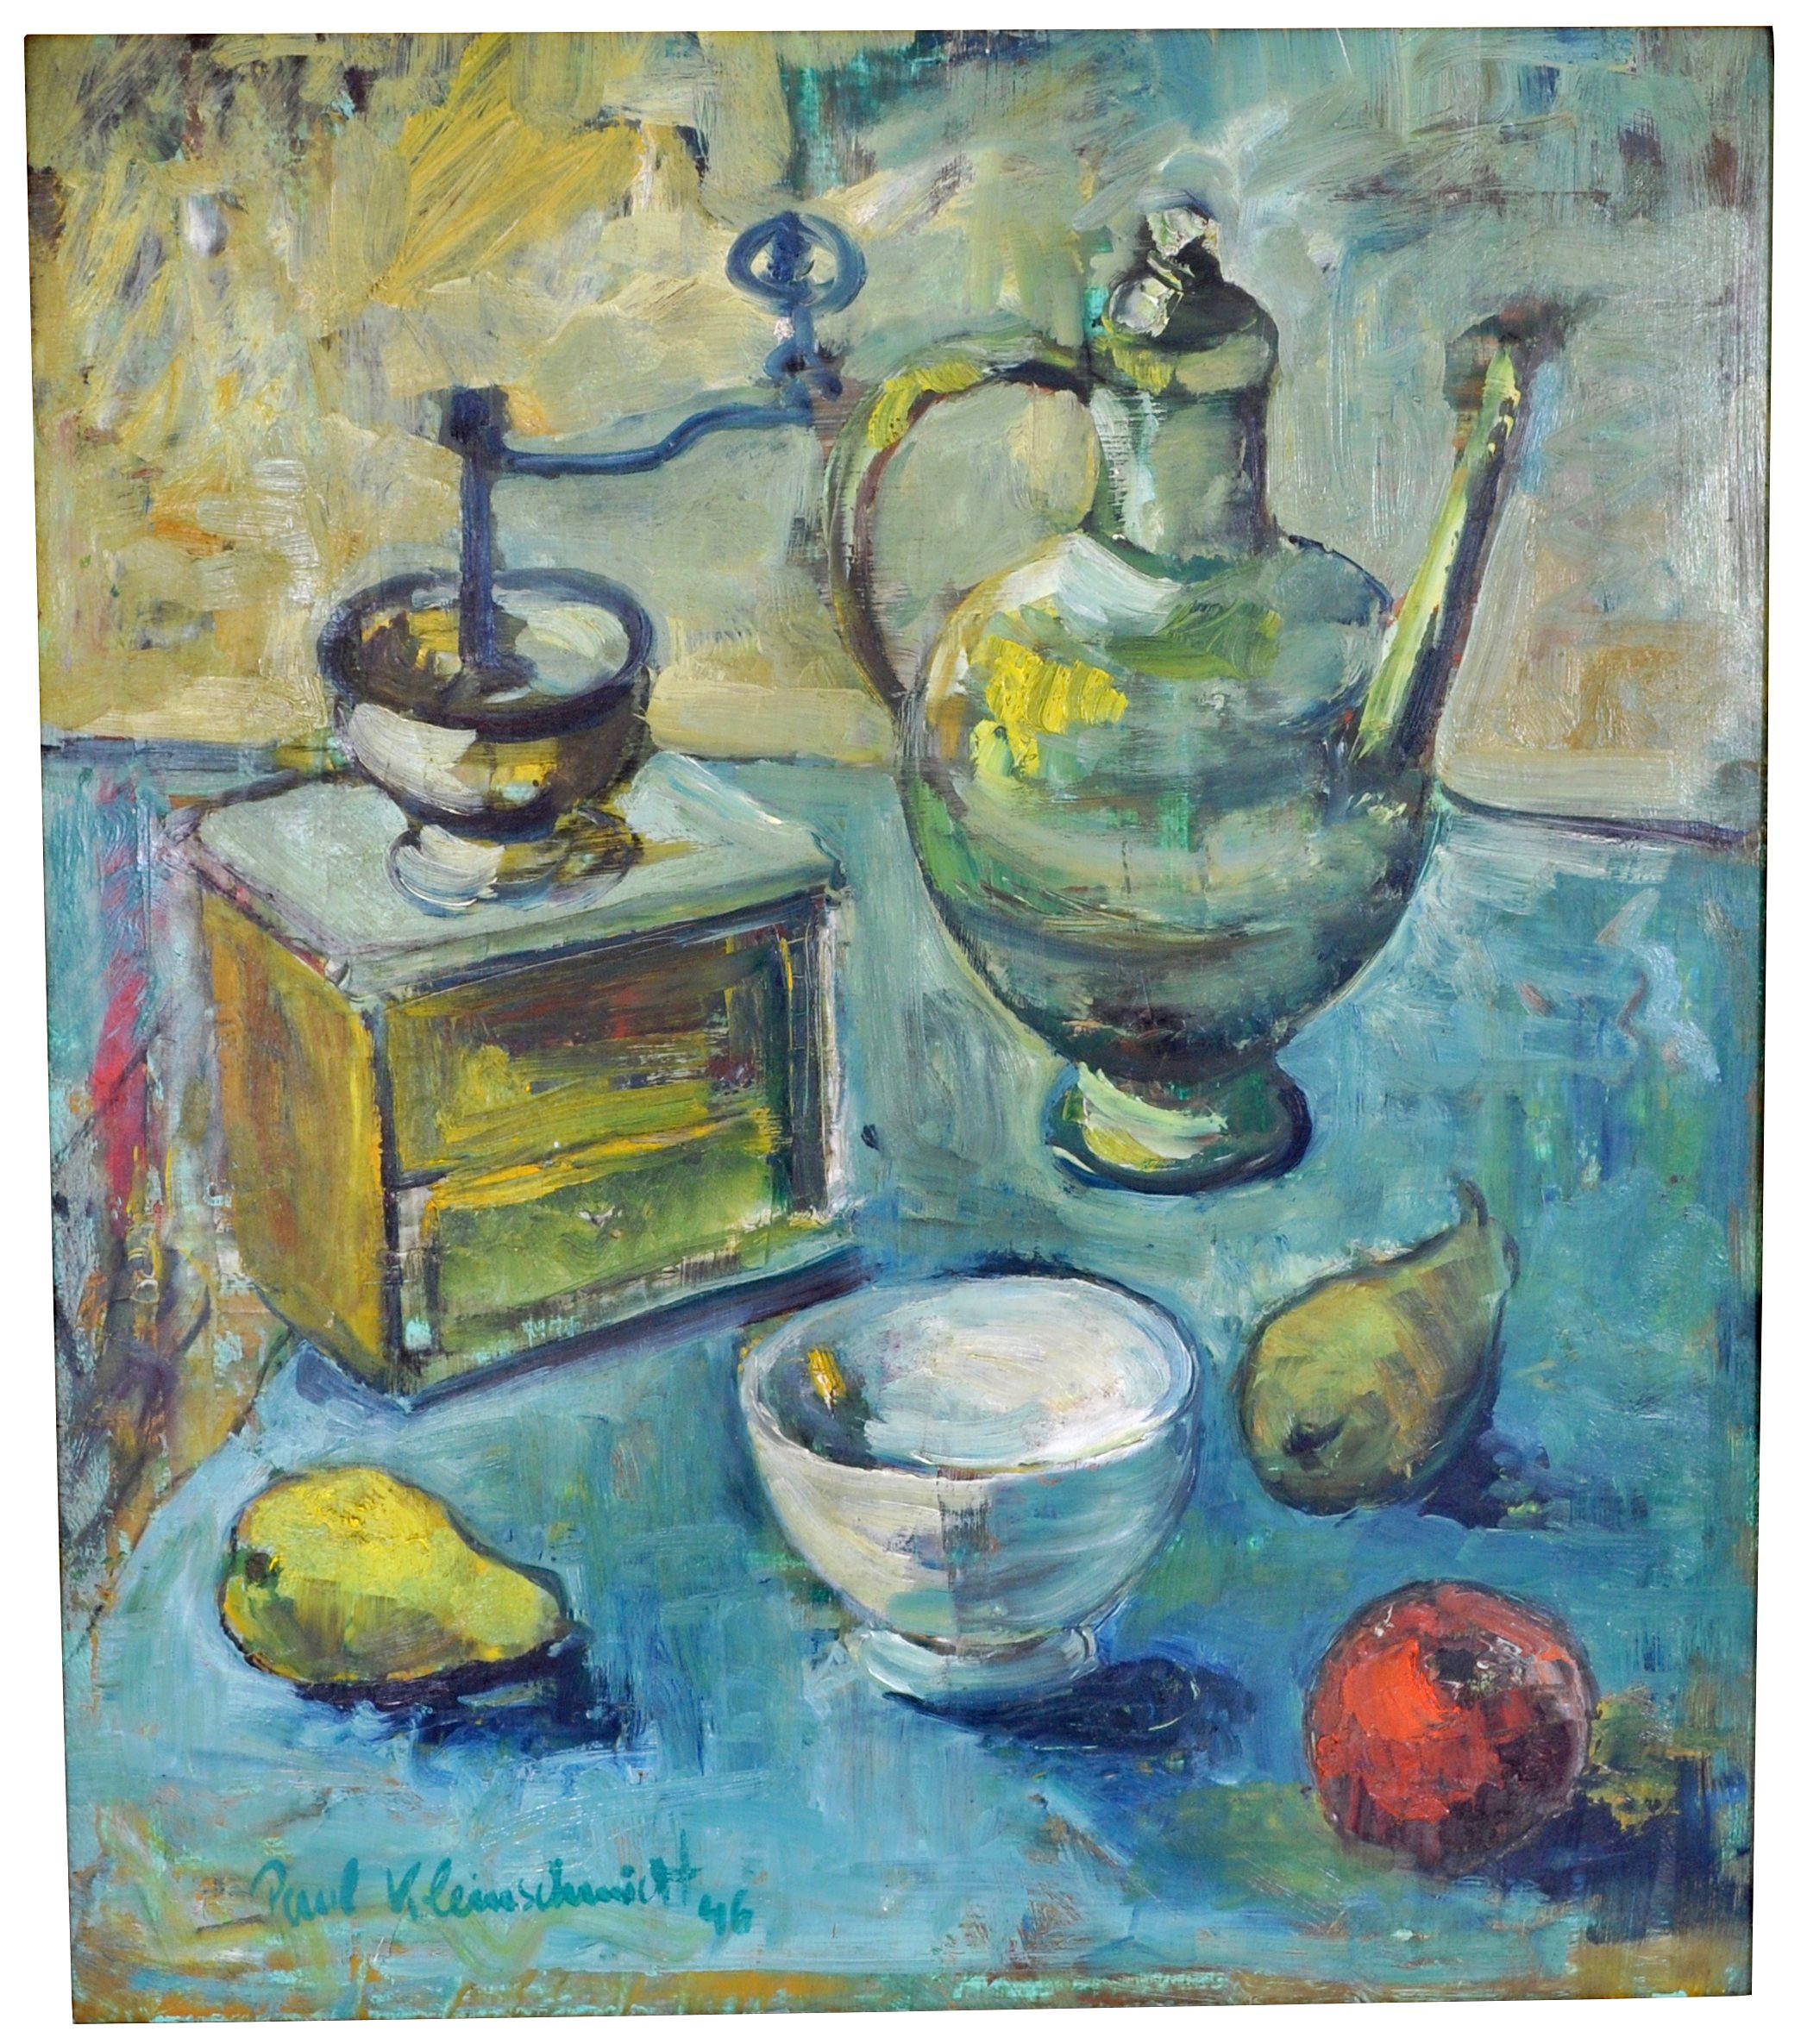 German Expressionist Oil on Board Still Life Painting by Paul Kleinschmidt 1946 1